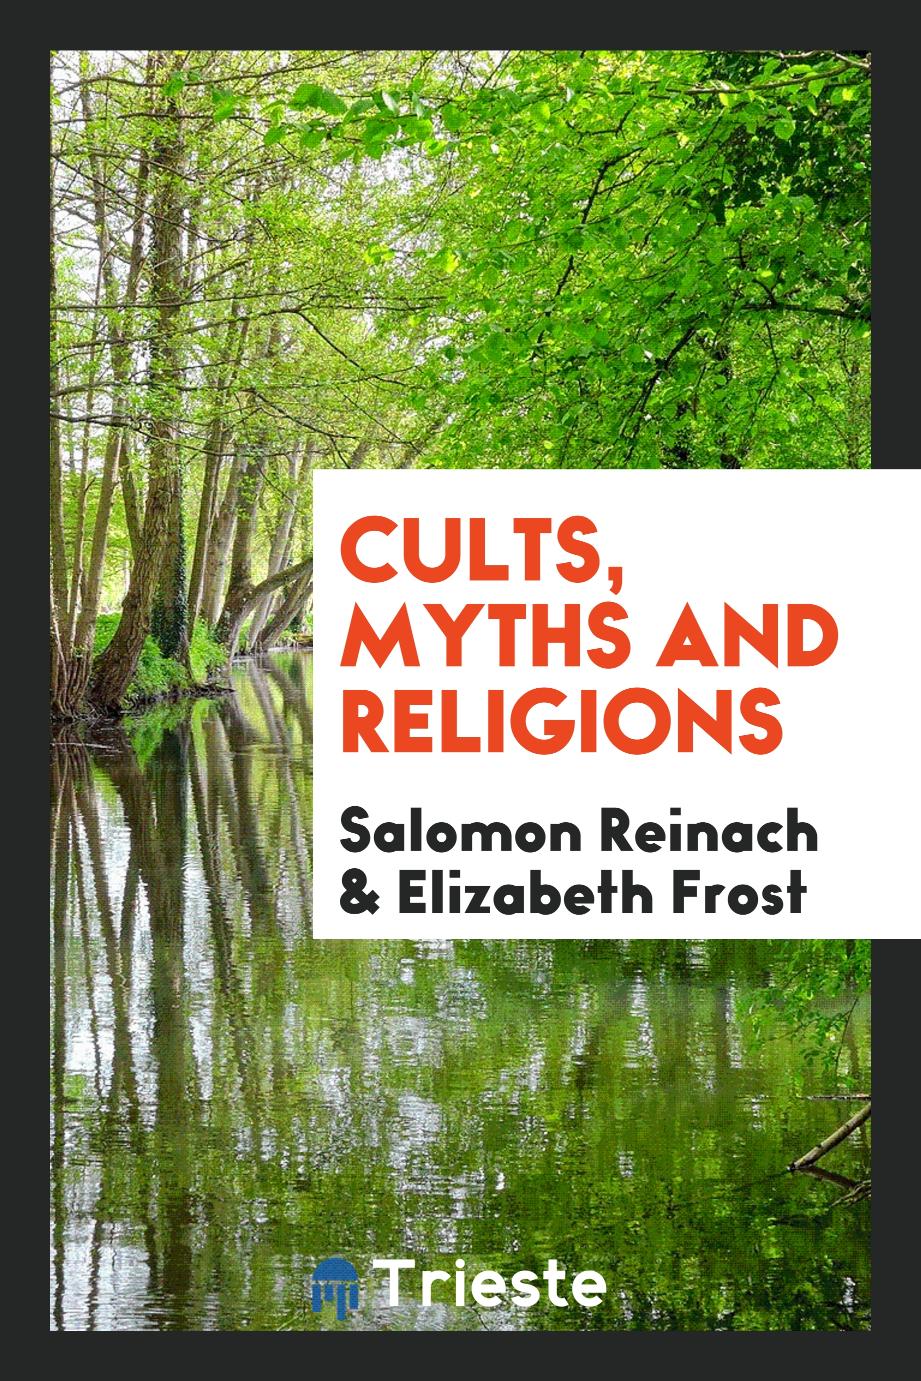 Cults, myths and religions